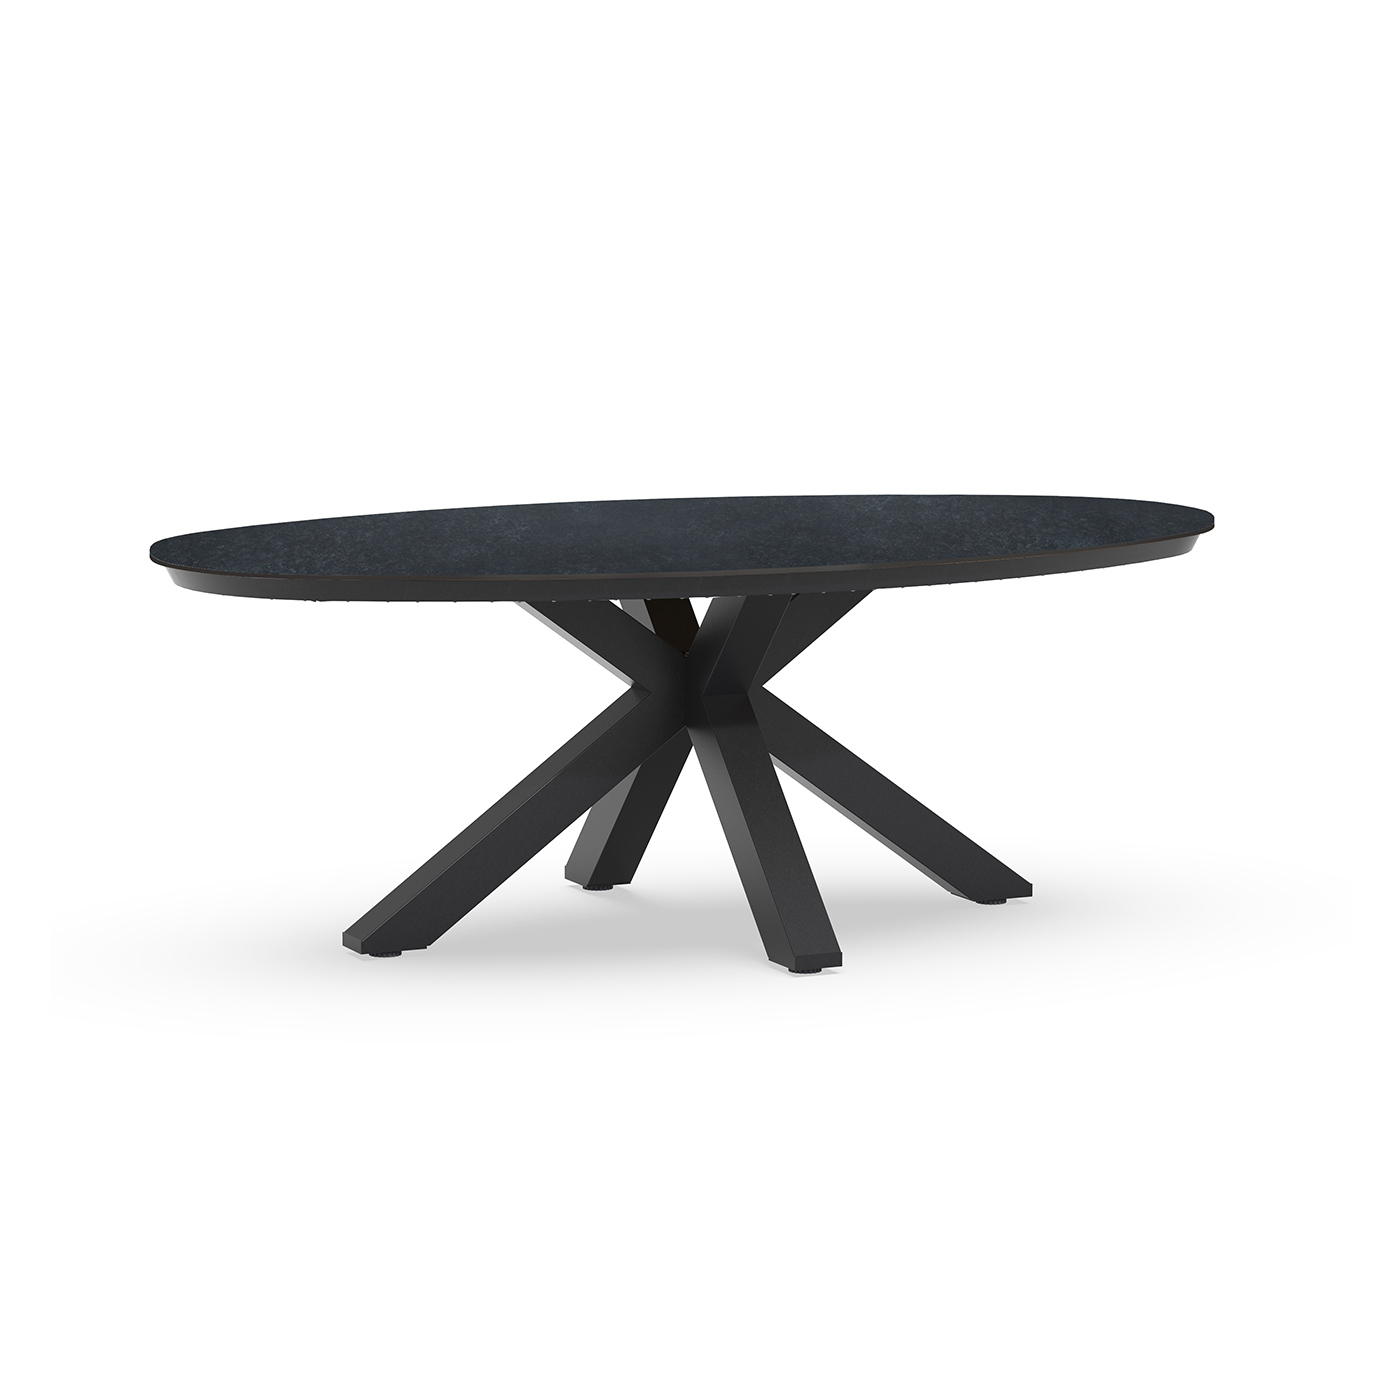 Oblong Low Dining Table Trespa Graphite 200 x 110 cm Charcoal